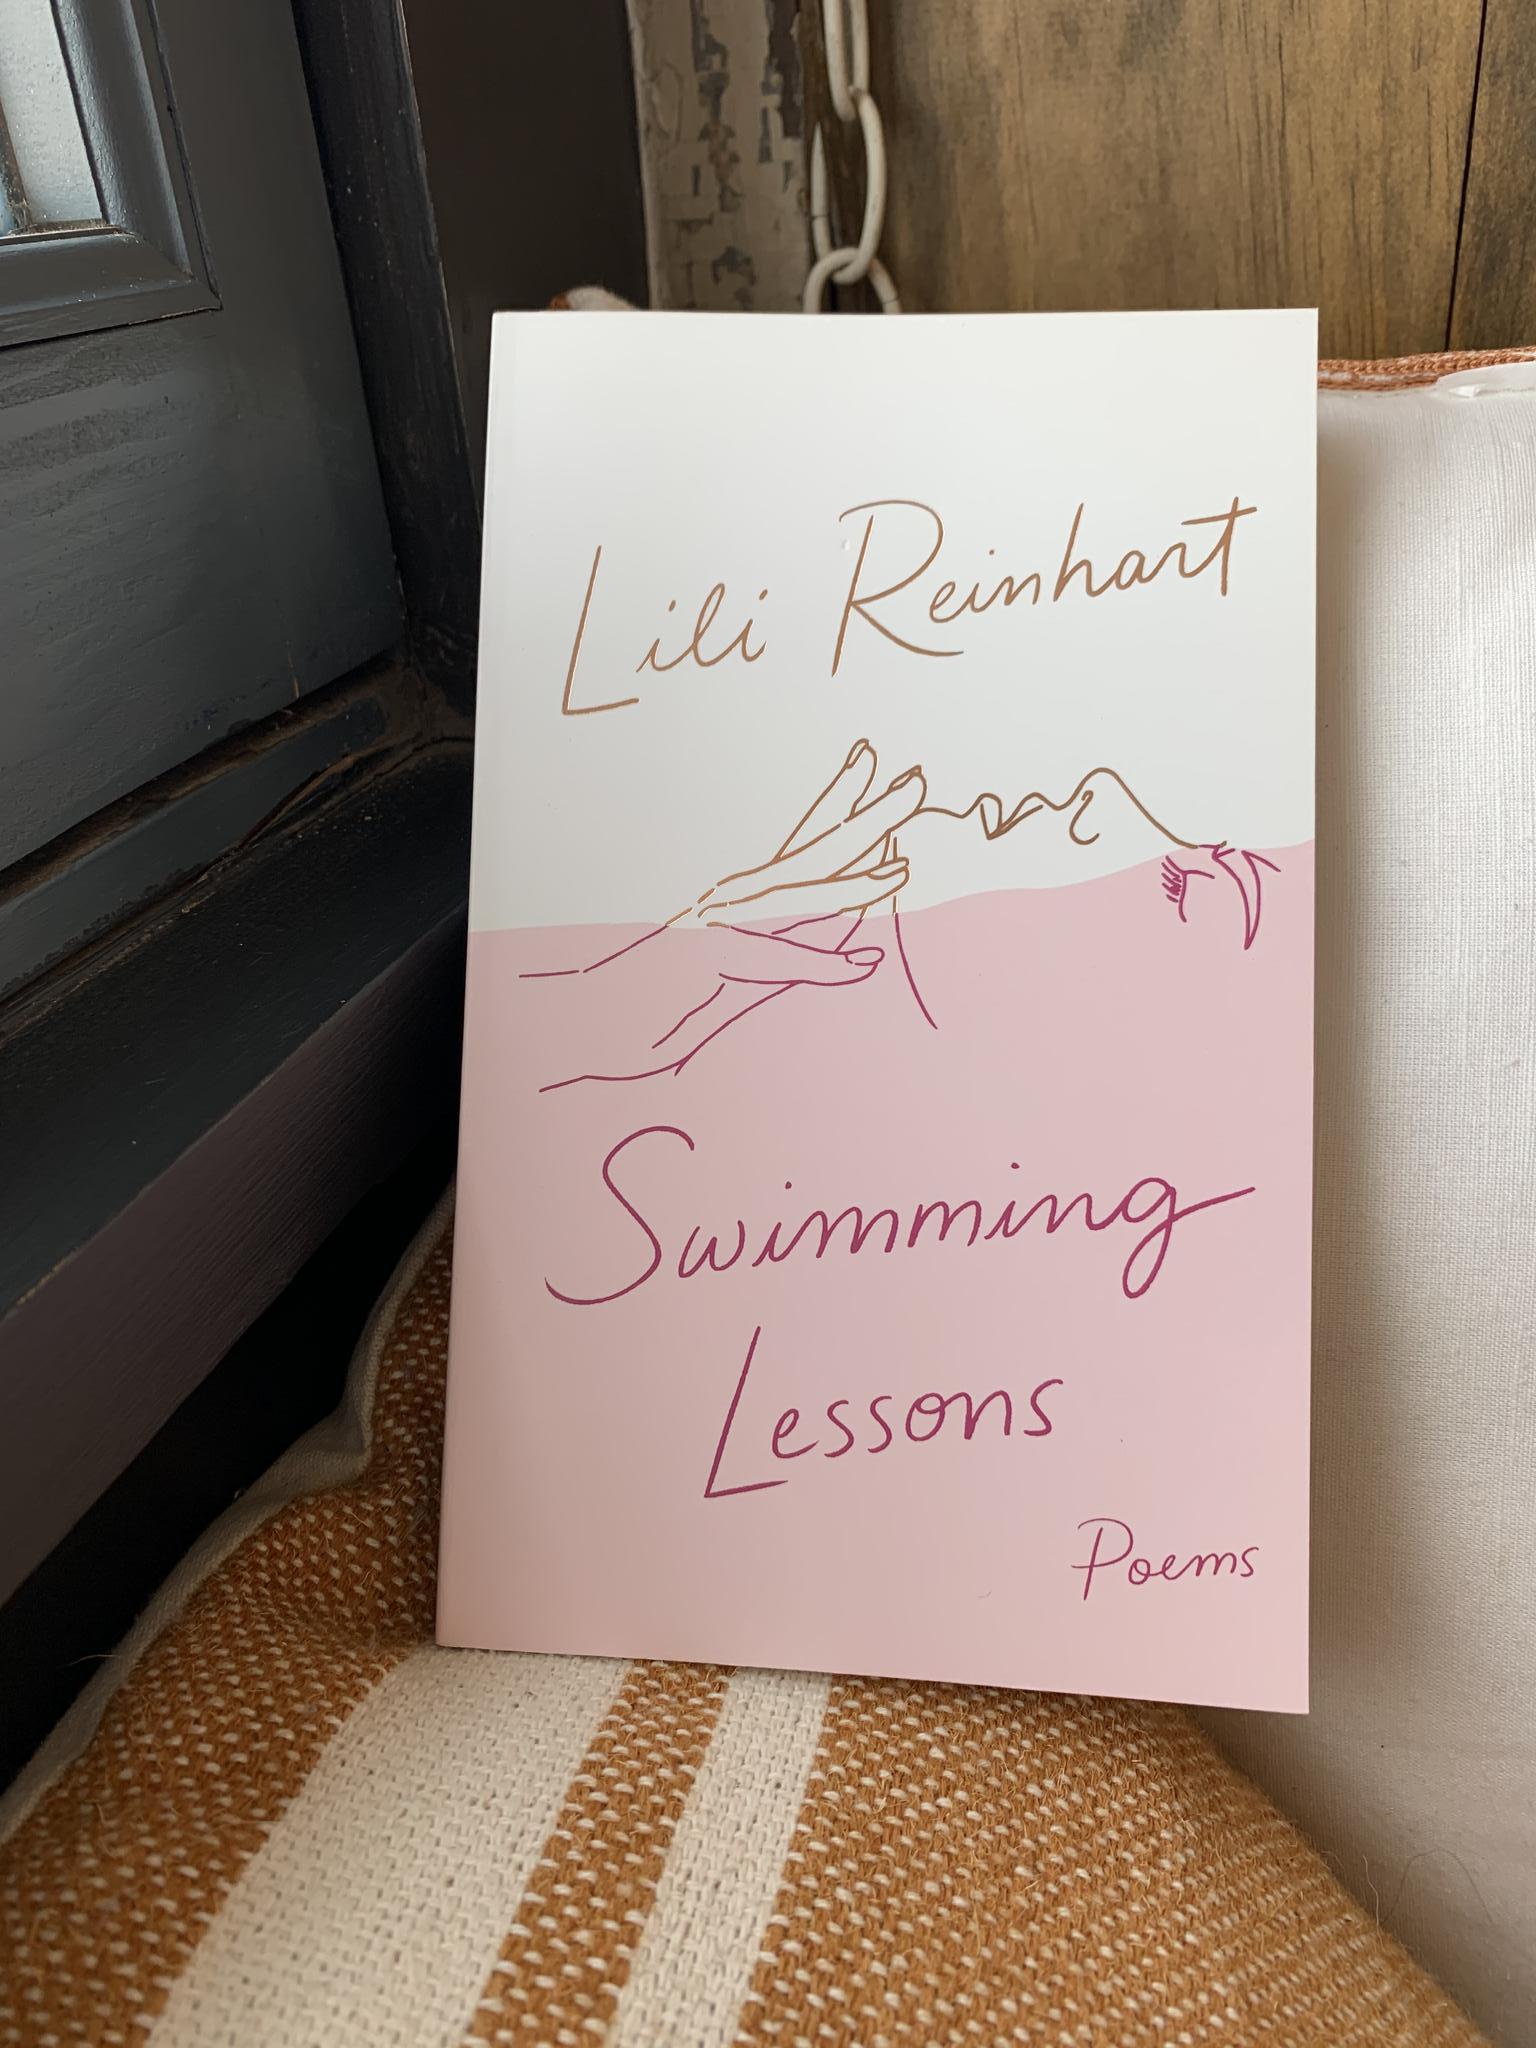 “Swimming Lessons” by Lili Reinhart